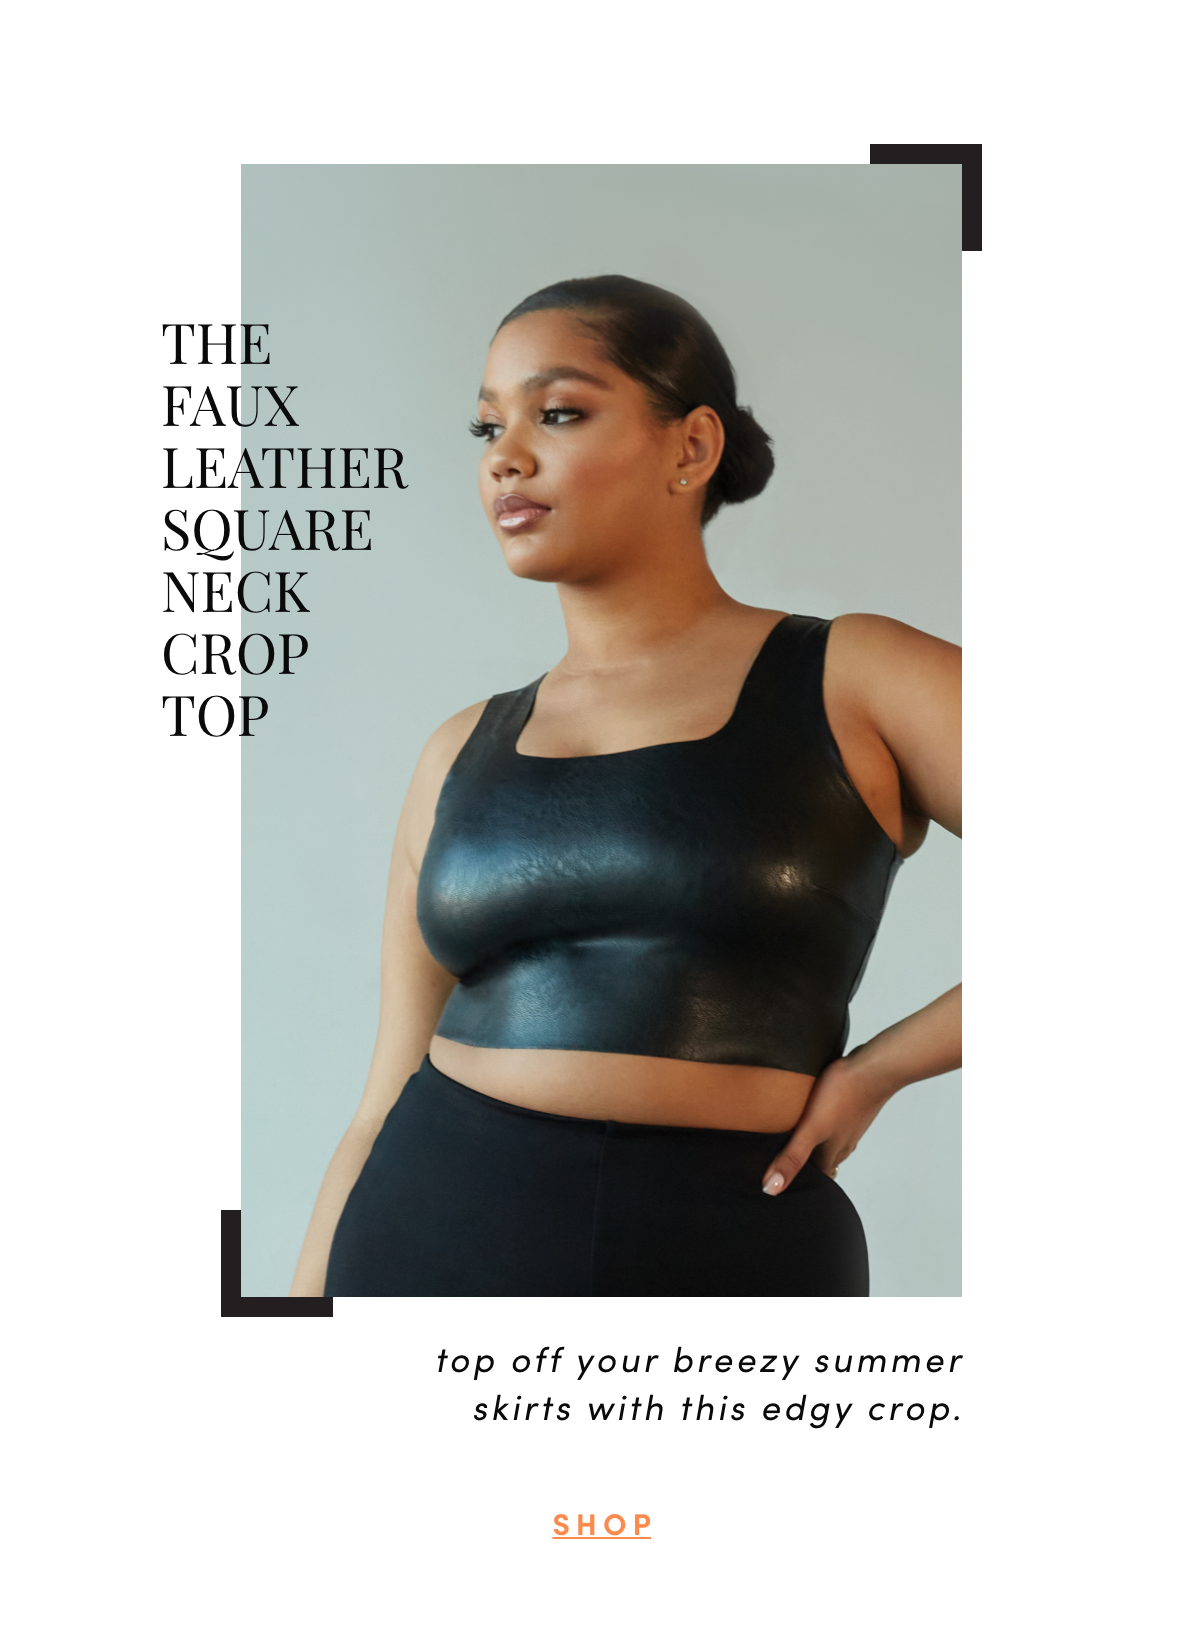 The Faux Leather Square Neck Crop Top